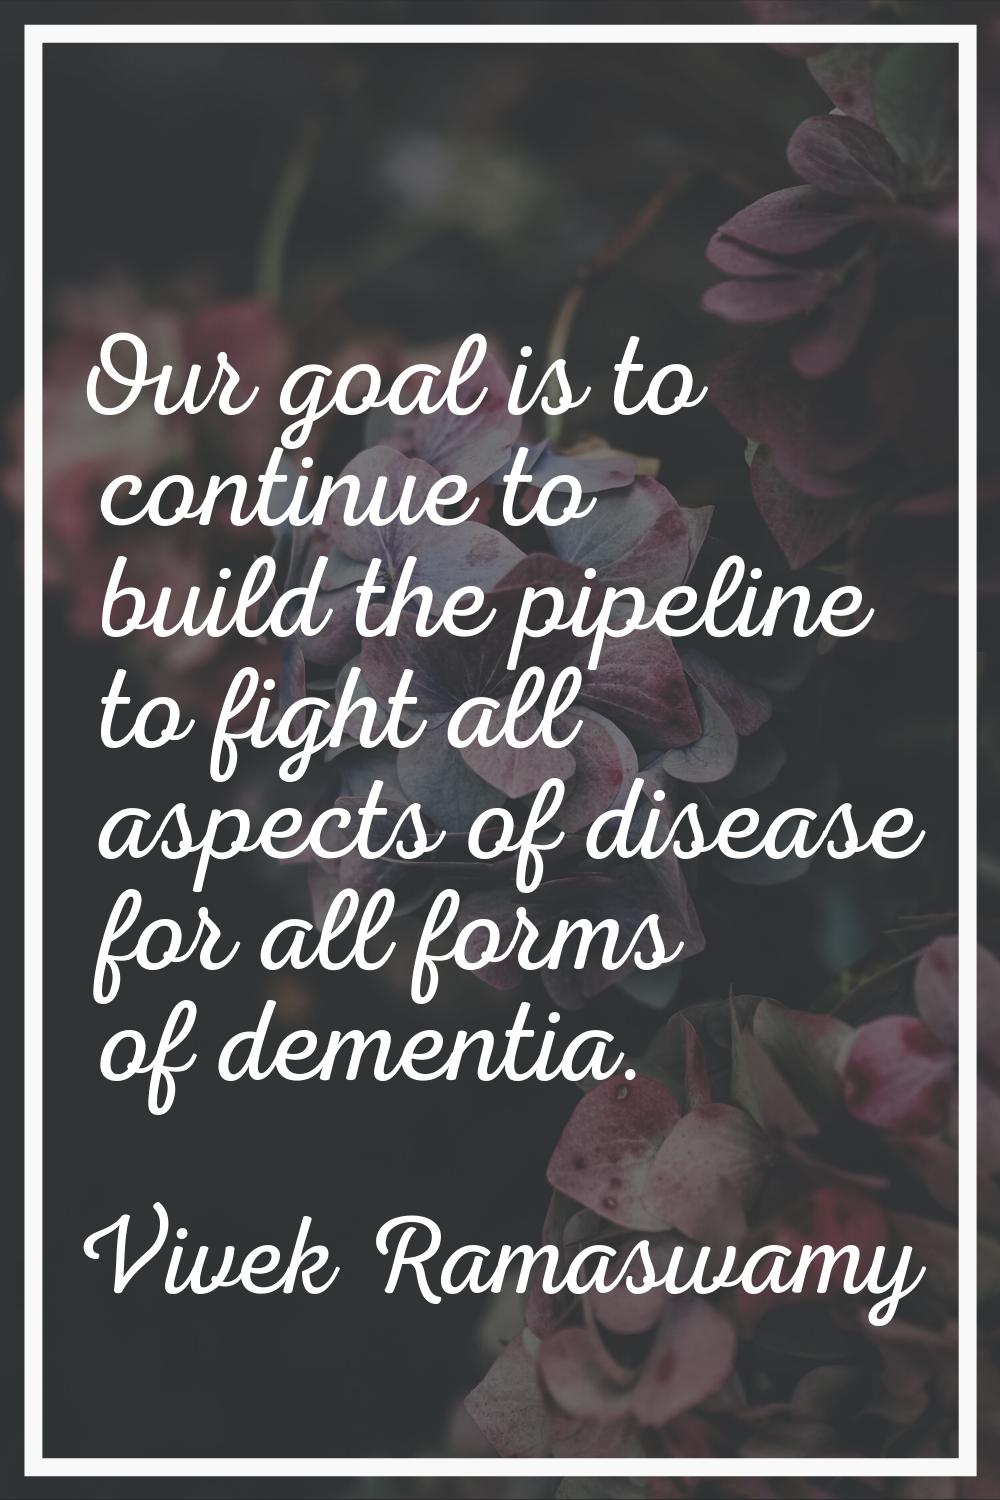 Our goal is to continue to build the pipeline to fight all aspects of disease for all forms of deme